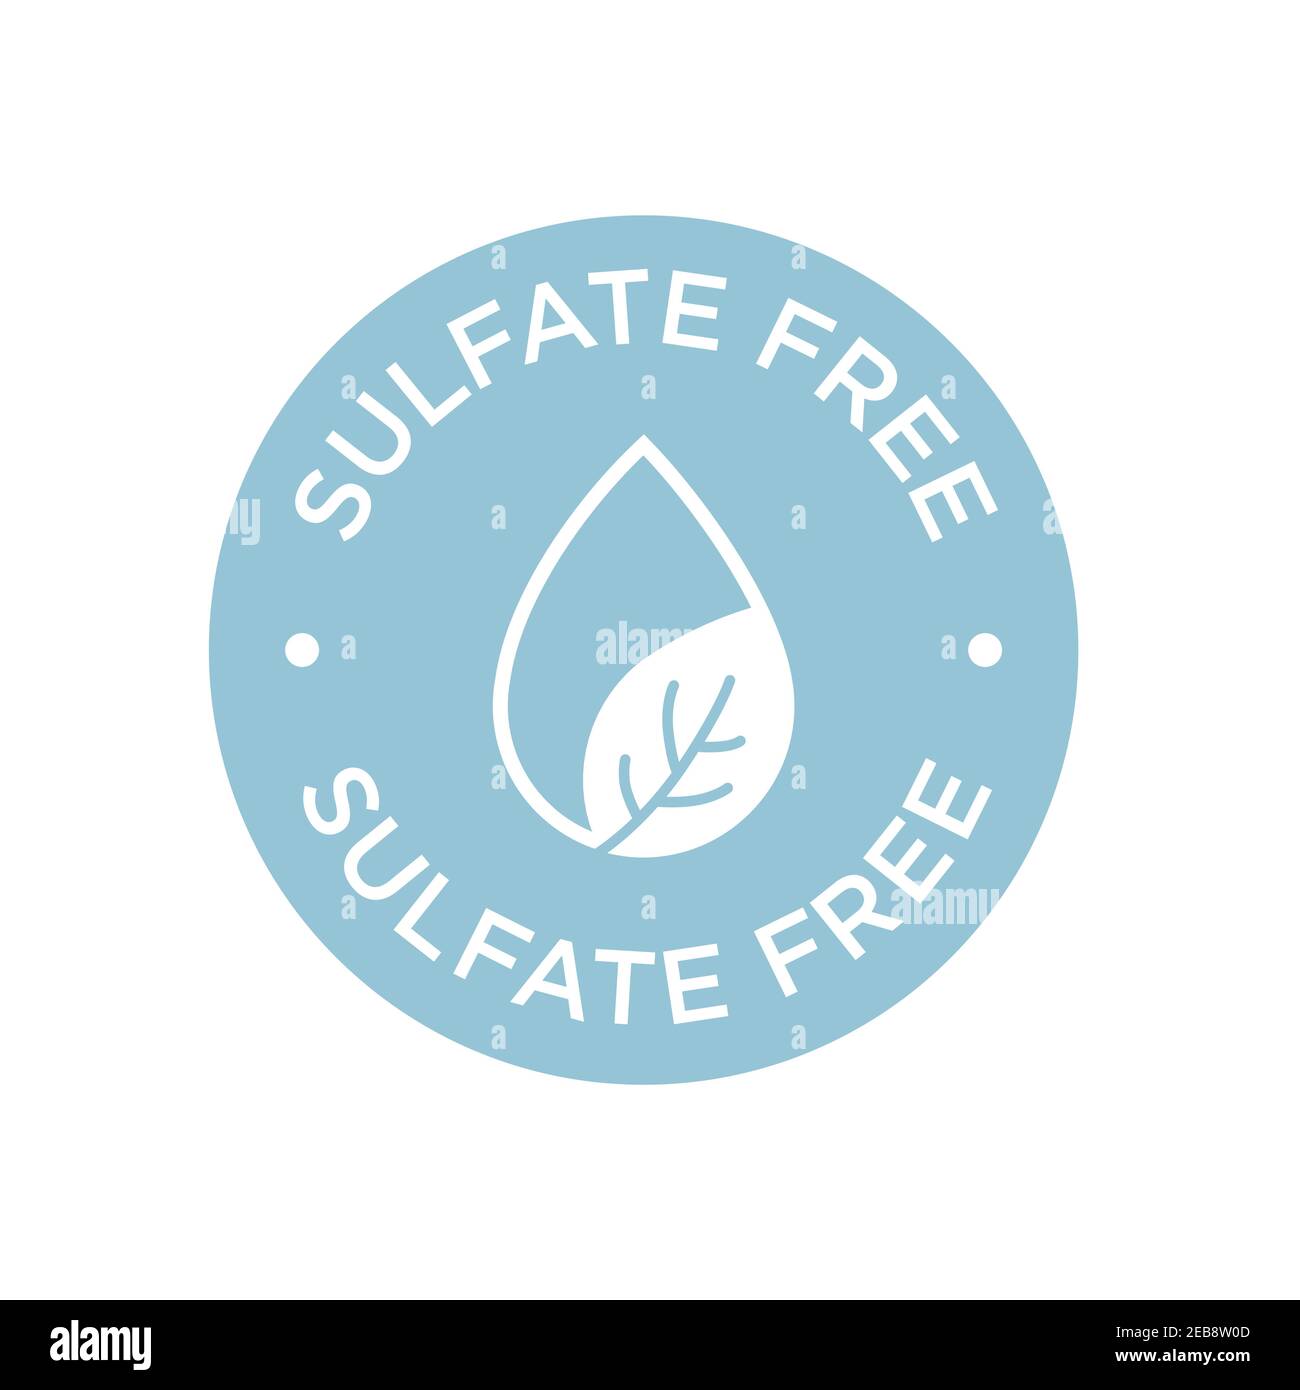 Sulfate free round icon.  Symbol for personal care products. Stock Vector